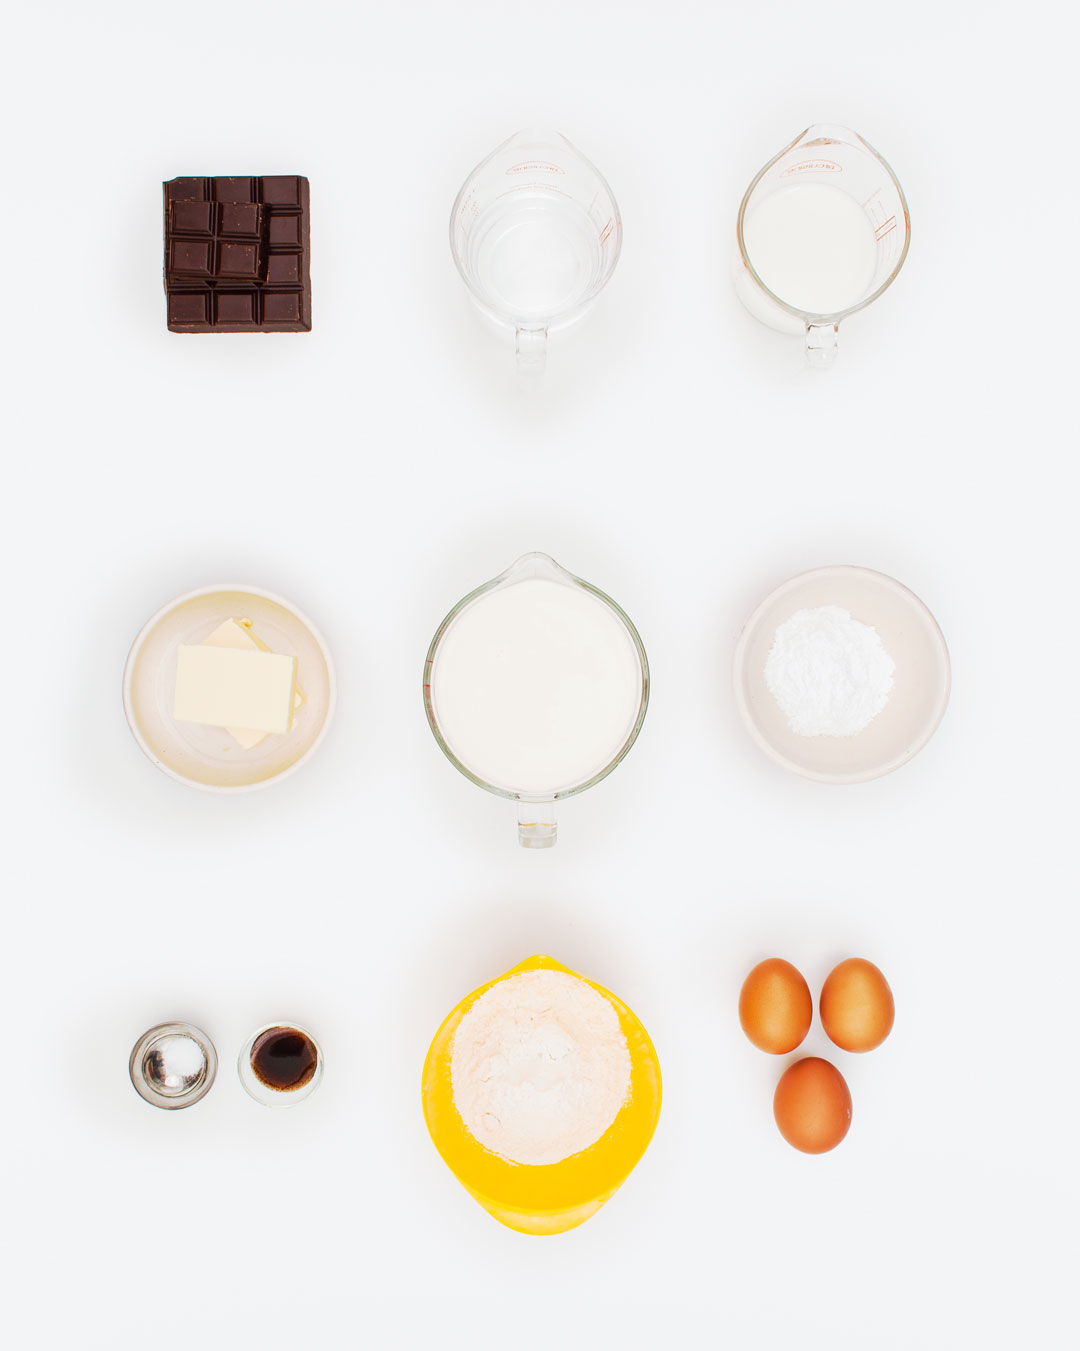 Ingredients for chocolate profiteroles, as featured in Simple & Classic